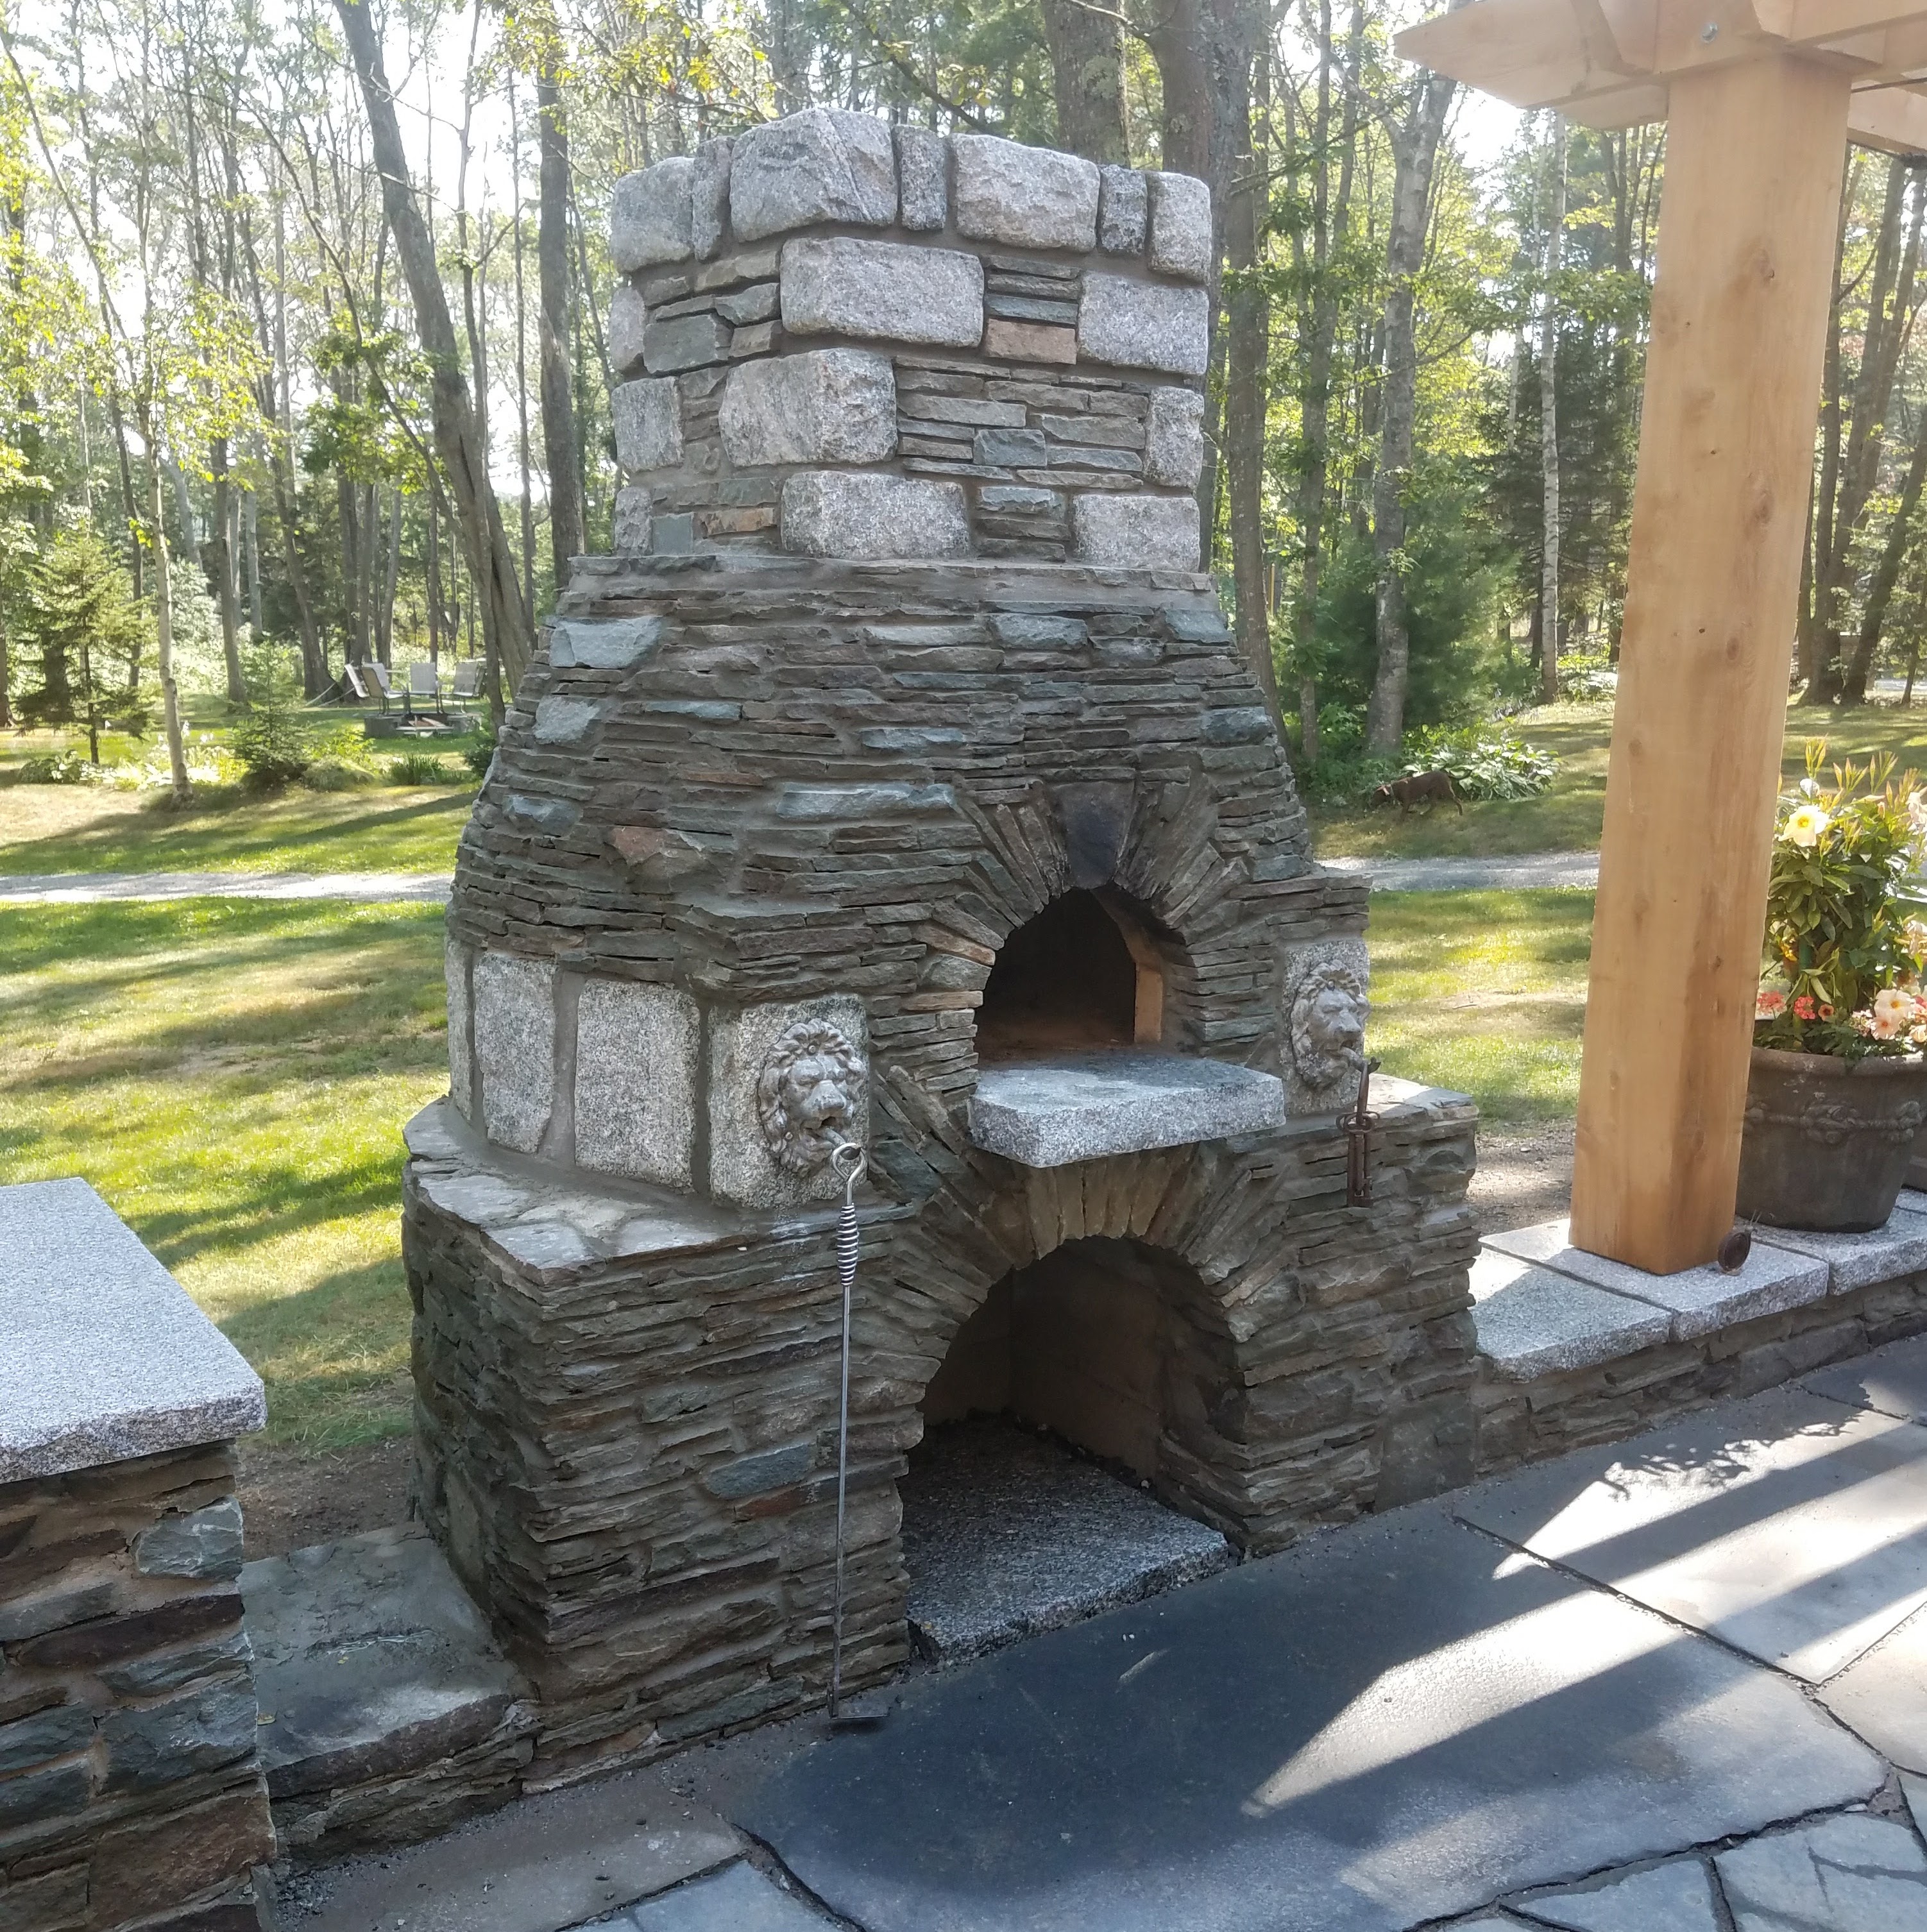 Nothing compares to brick oven pizza, and why not prepare it in a custom wood-fired oven like this one in Cape Elizabeth, Maine